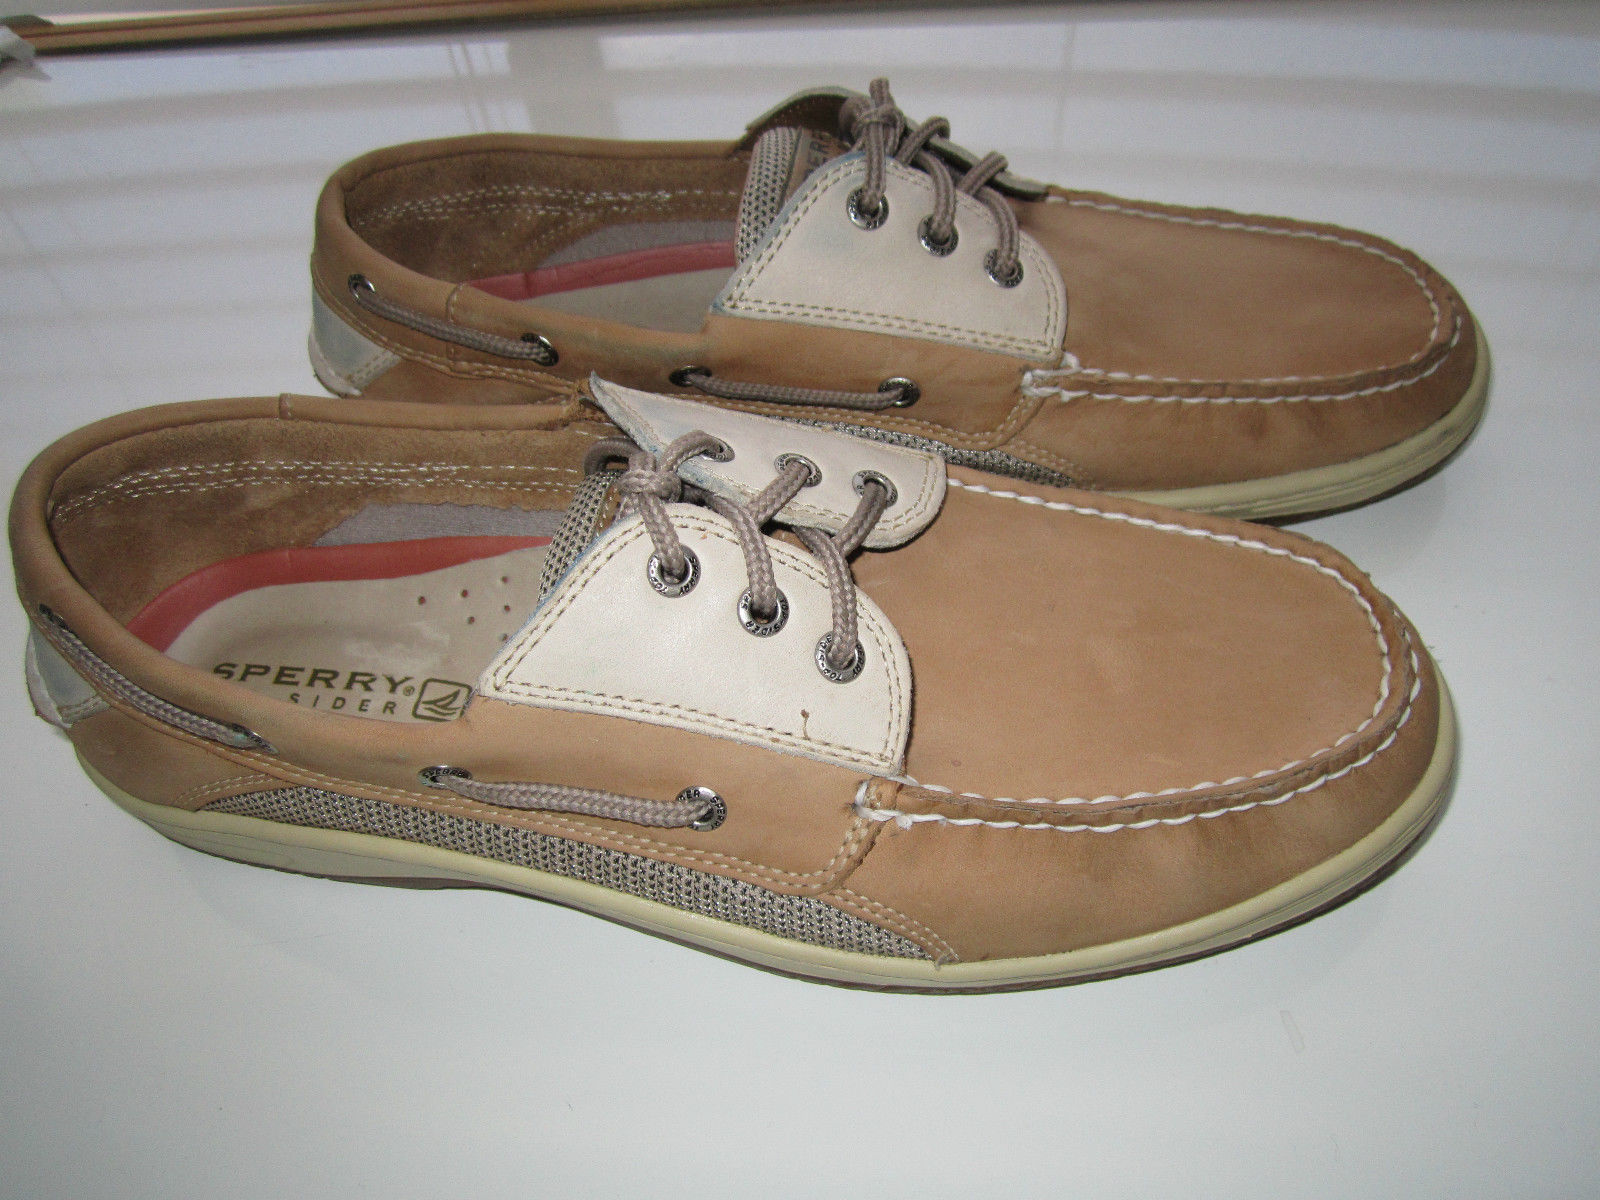 Primary image for Sperry Top-Sider 799023 Nice Oxfords Men’s Boat Shoes Chestnut 11.5M